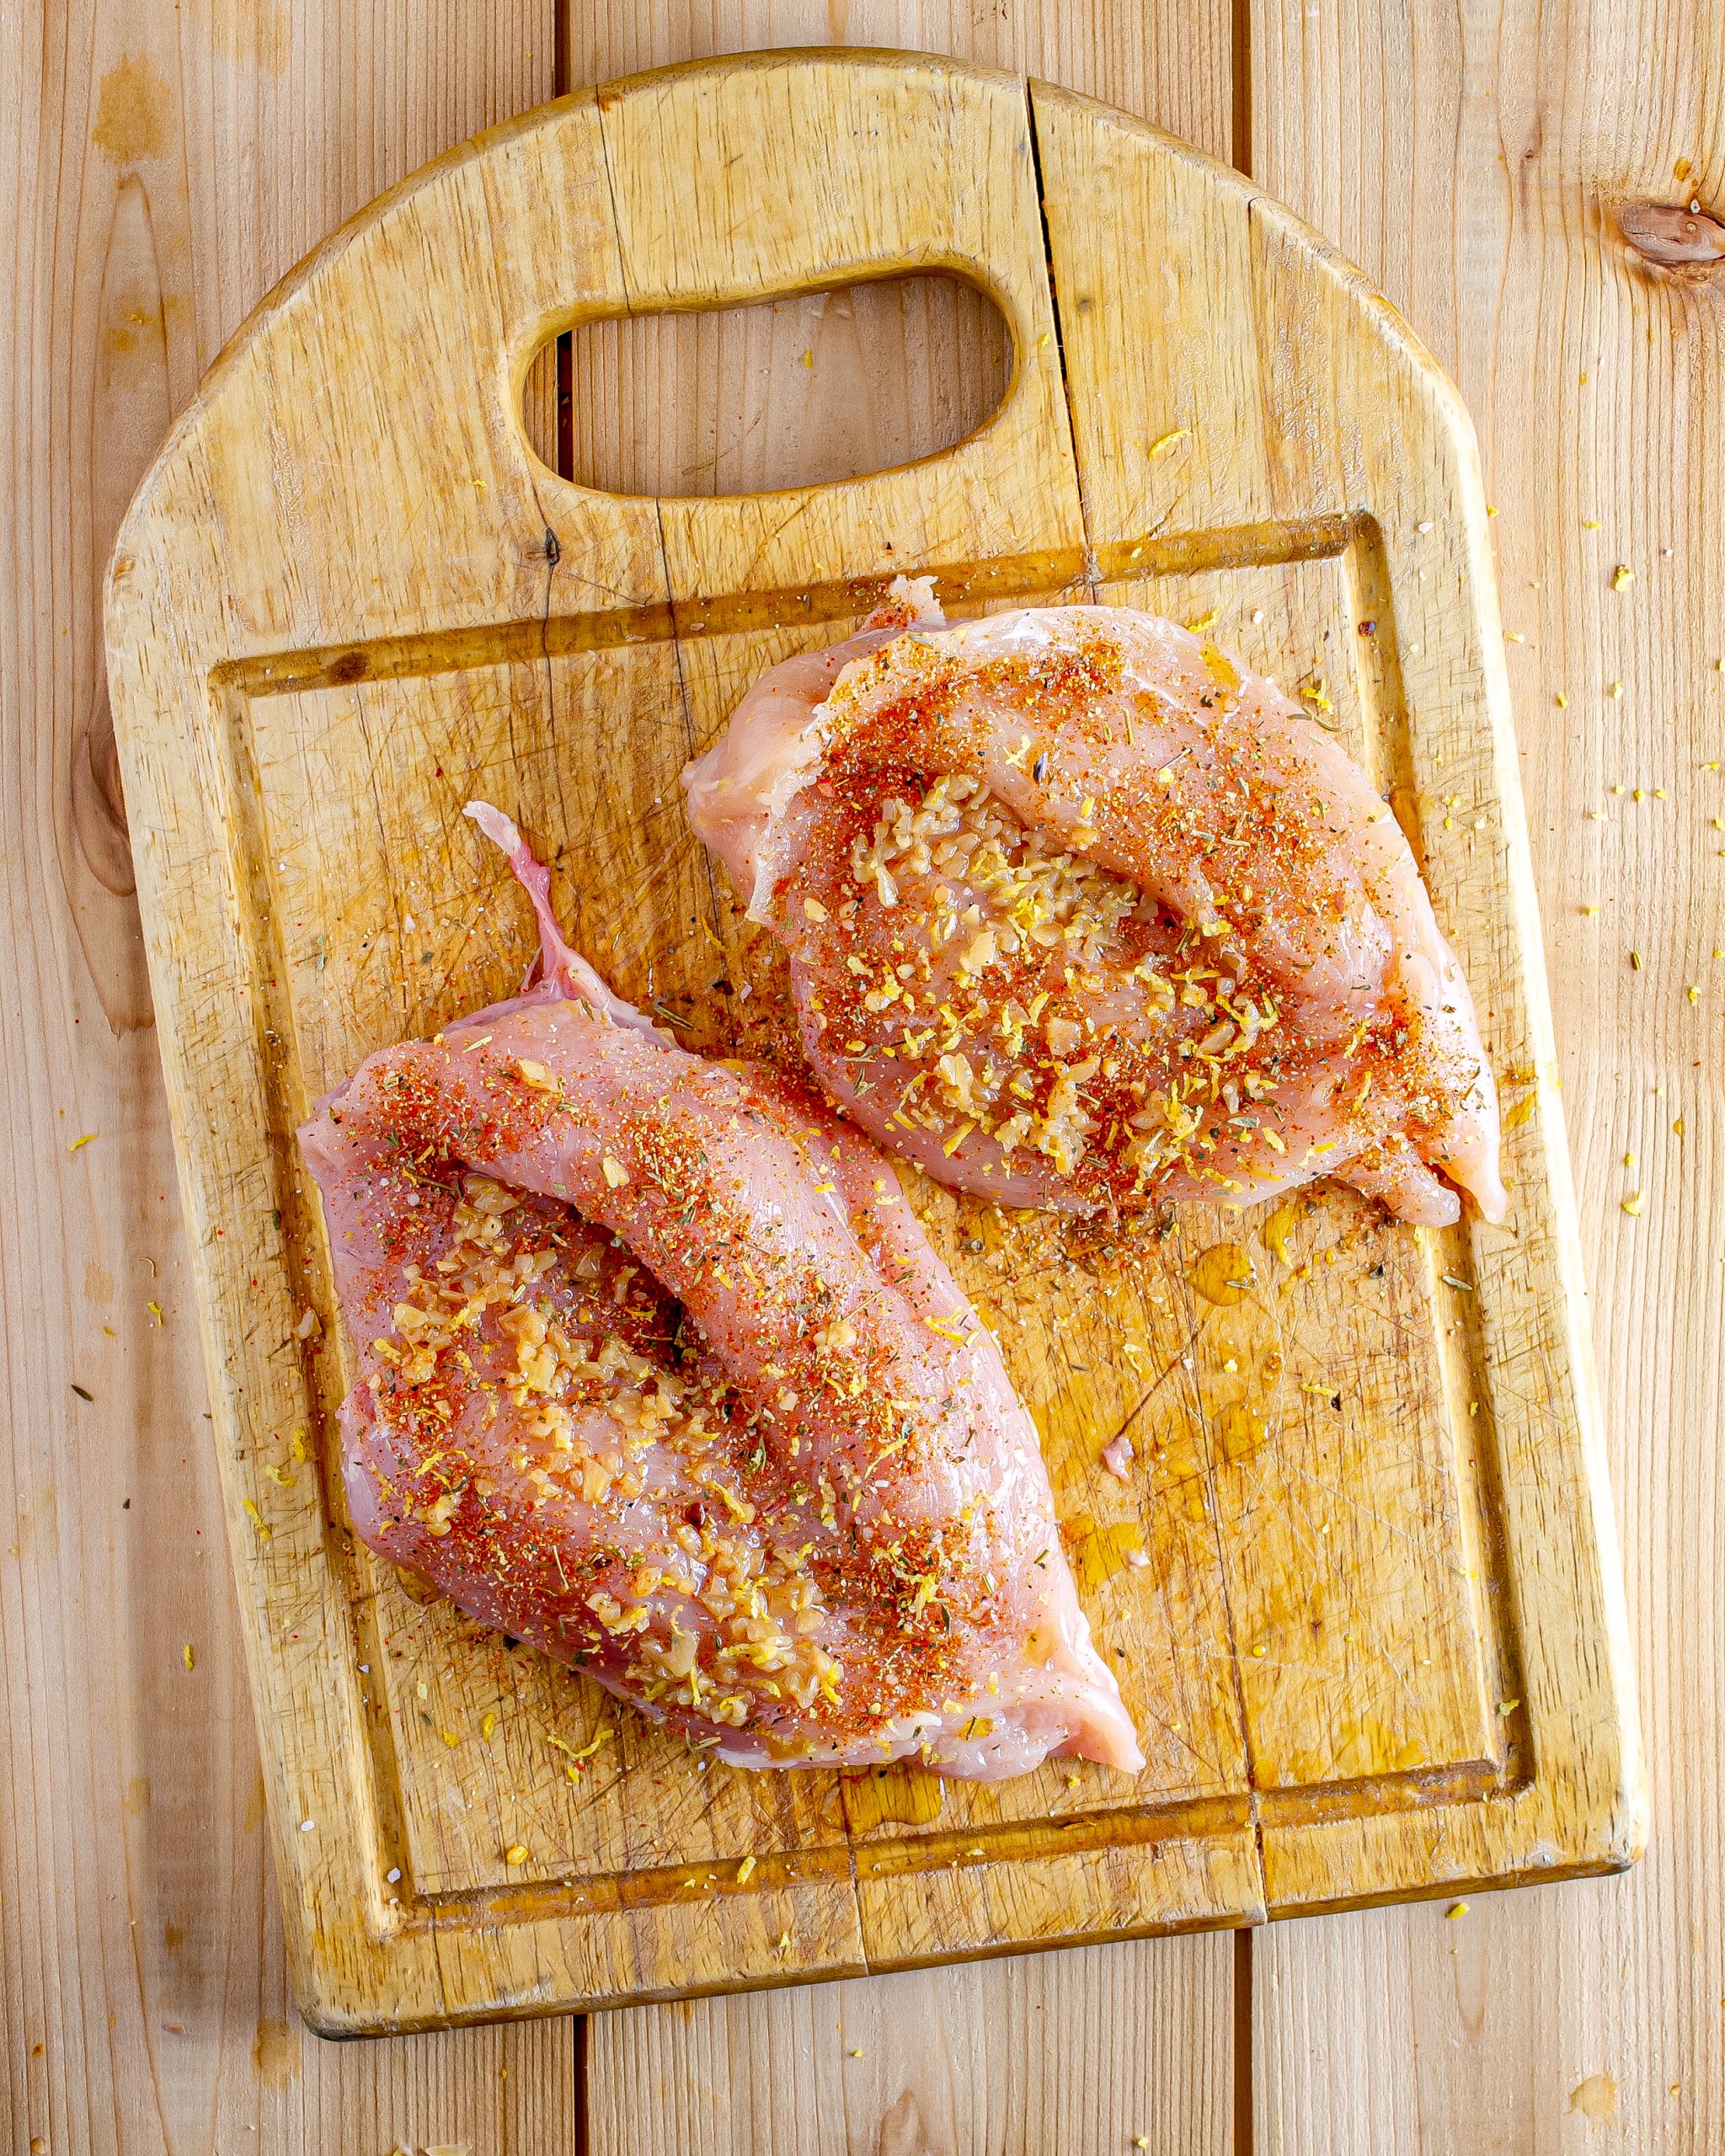 Drizzle the chicken breasts with olive oil, and sprinkle with the seasonings, 1 tsp of garlic, and lemon zest.